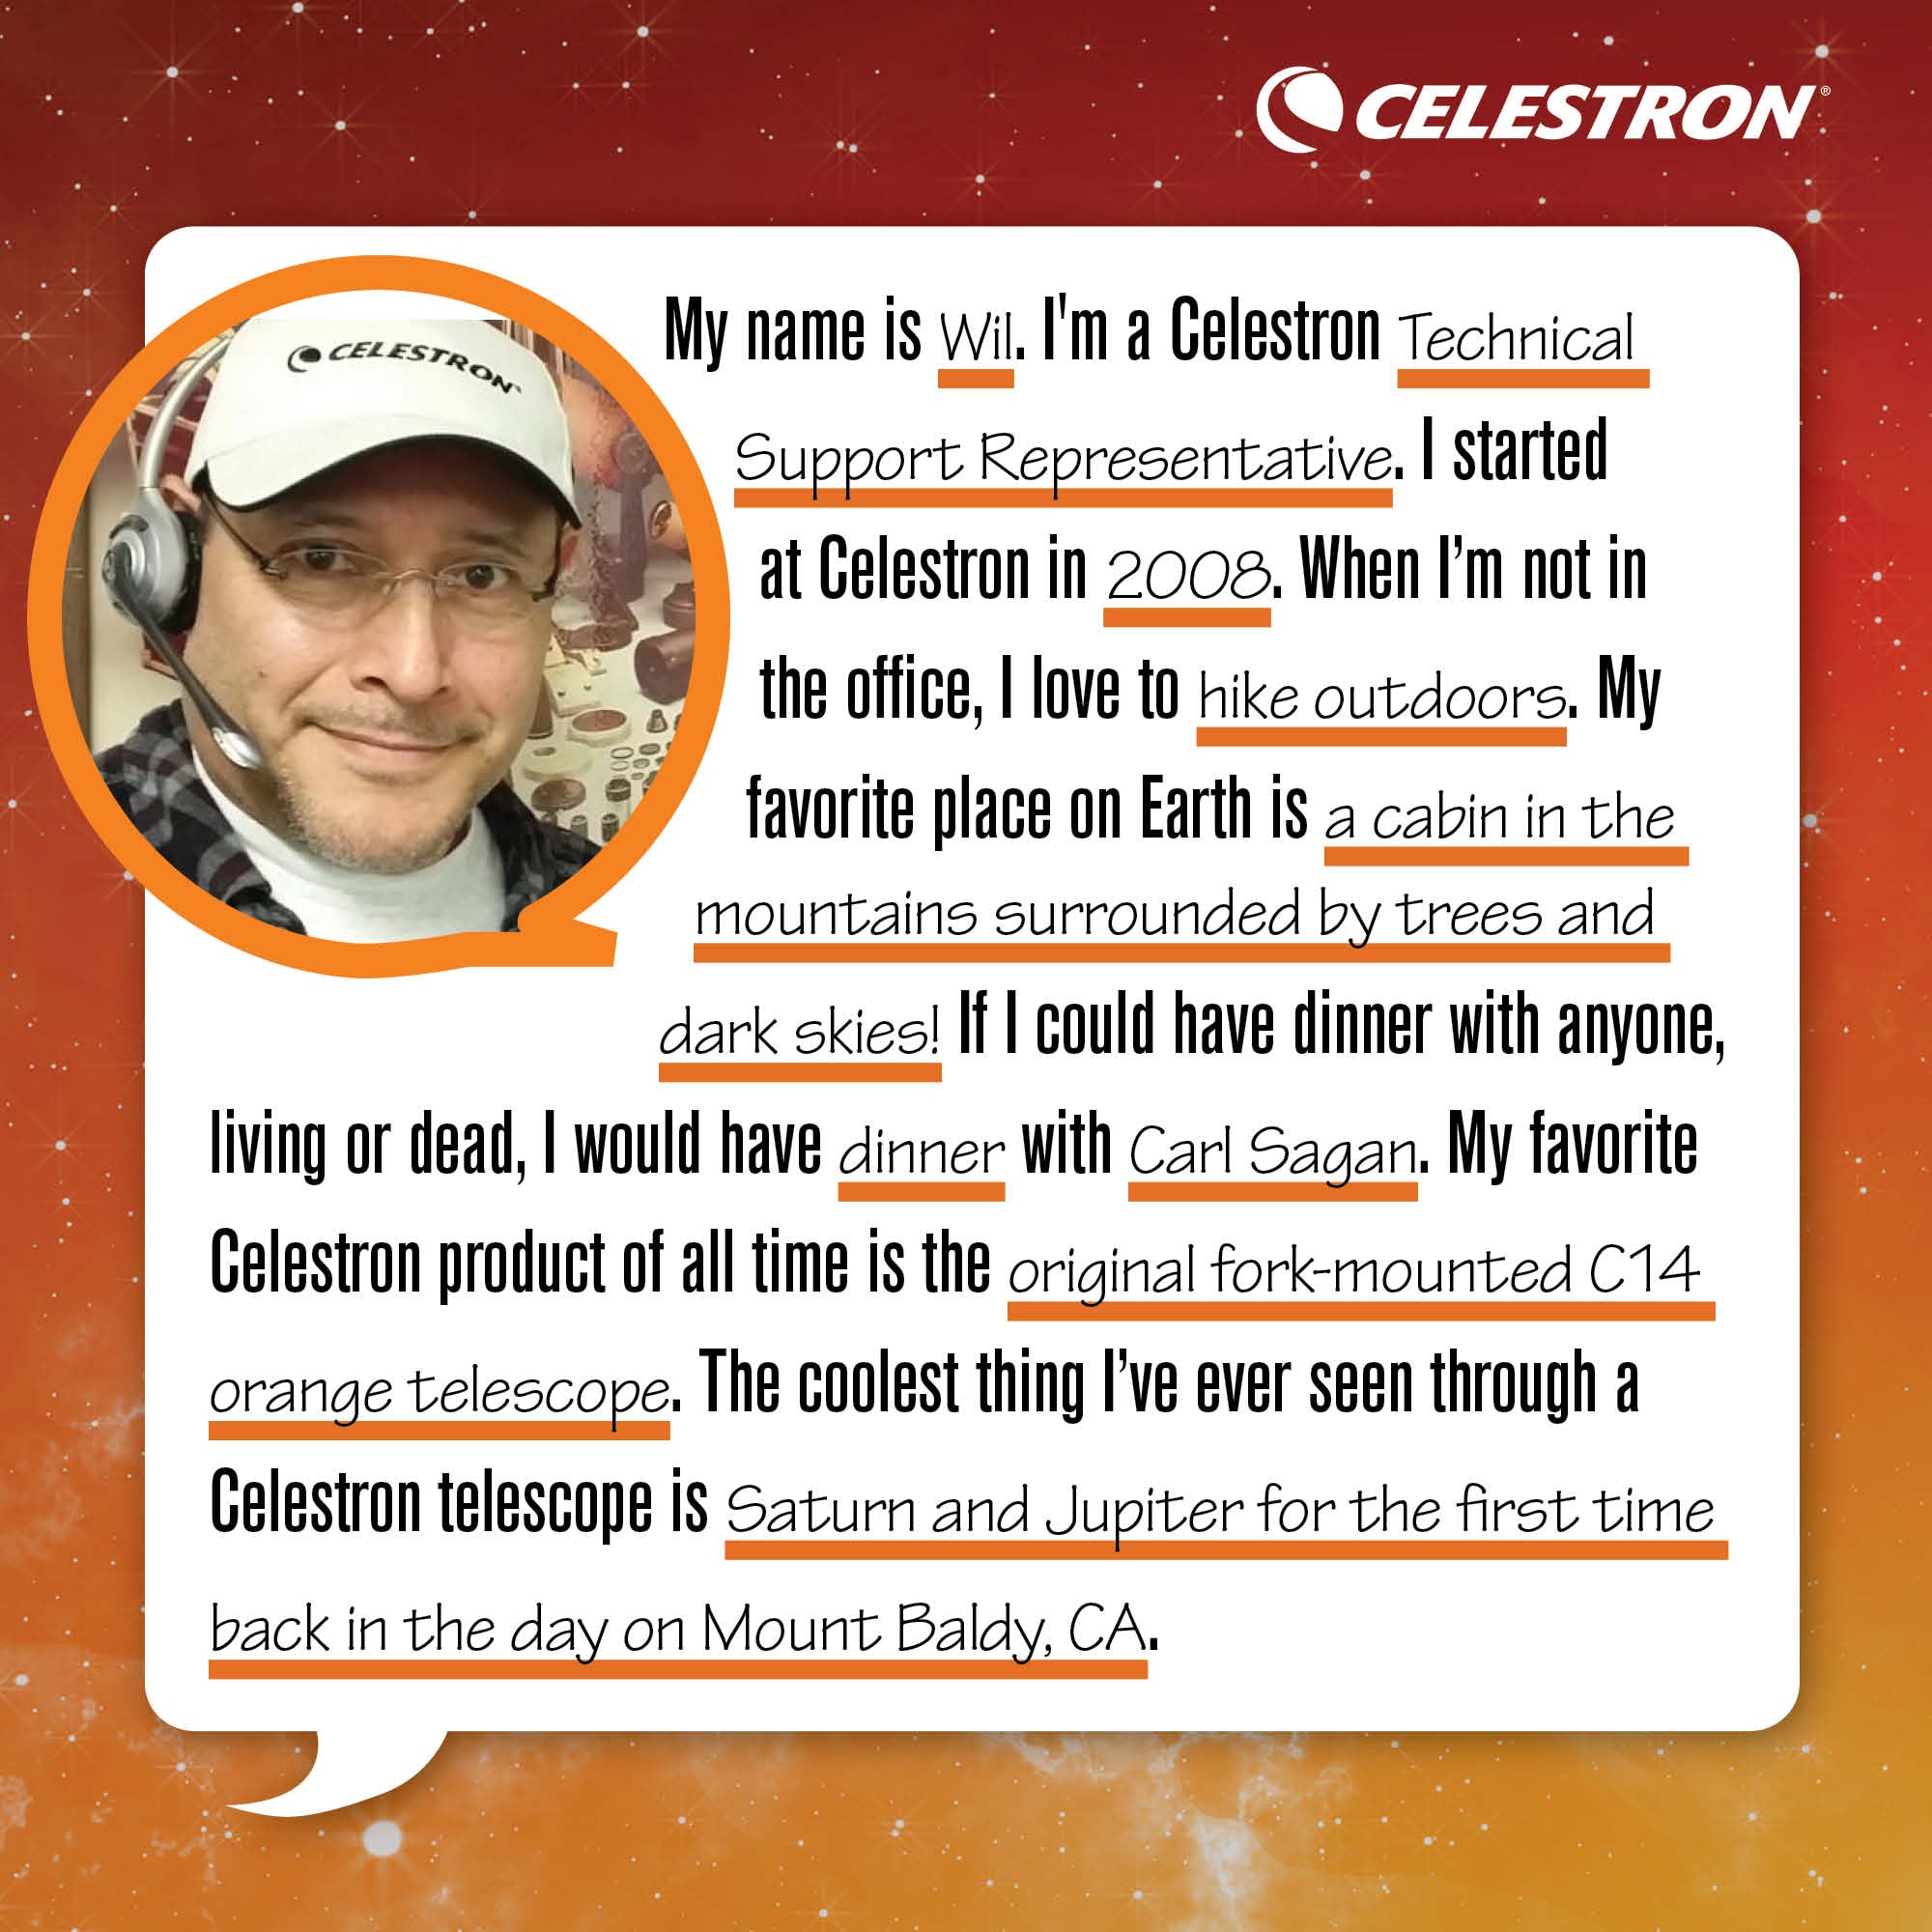 My name is Wil. I'm Celestron's Technical Support Representative. I started at Celestron in 2008. When I'm not in the office, I love to hike the outdoors.  My favorite place on Earth is a cabin in the mountains surrounded by trees and dark skies! If I could have dinner with anyone, living or dead, I would have dinner with Carl Sagan. My favorite Celestron product of all time is the original fork-mounted C14 orange telescope. The coolest thing I've ever seen through a Celestron telescope is Saturn and Jupiter for the first time back in the day on Mount Baldy, CA.